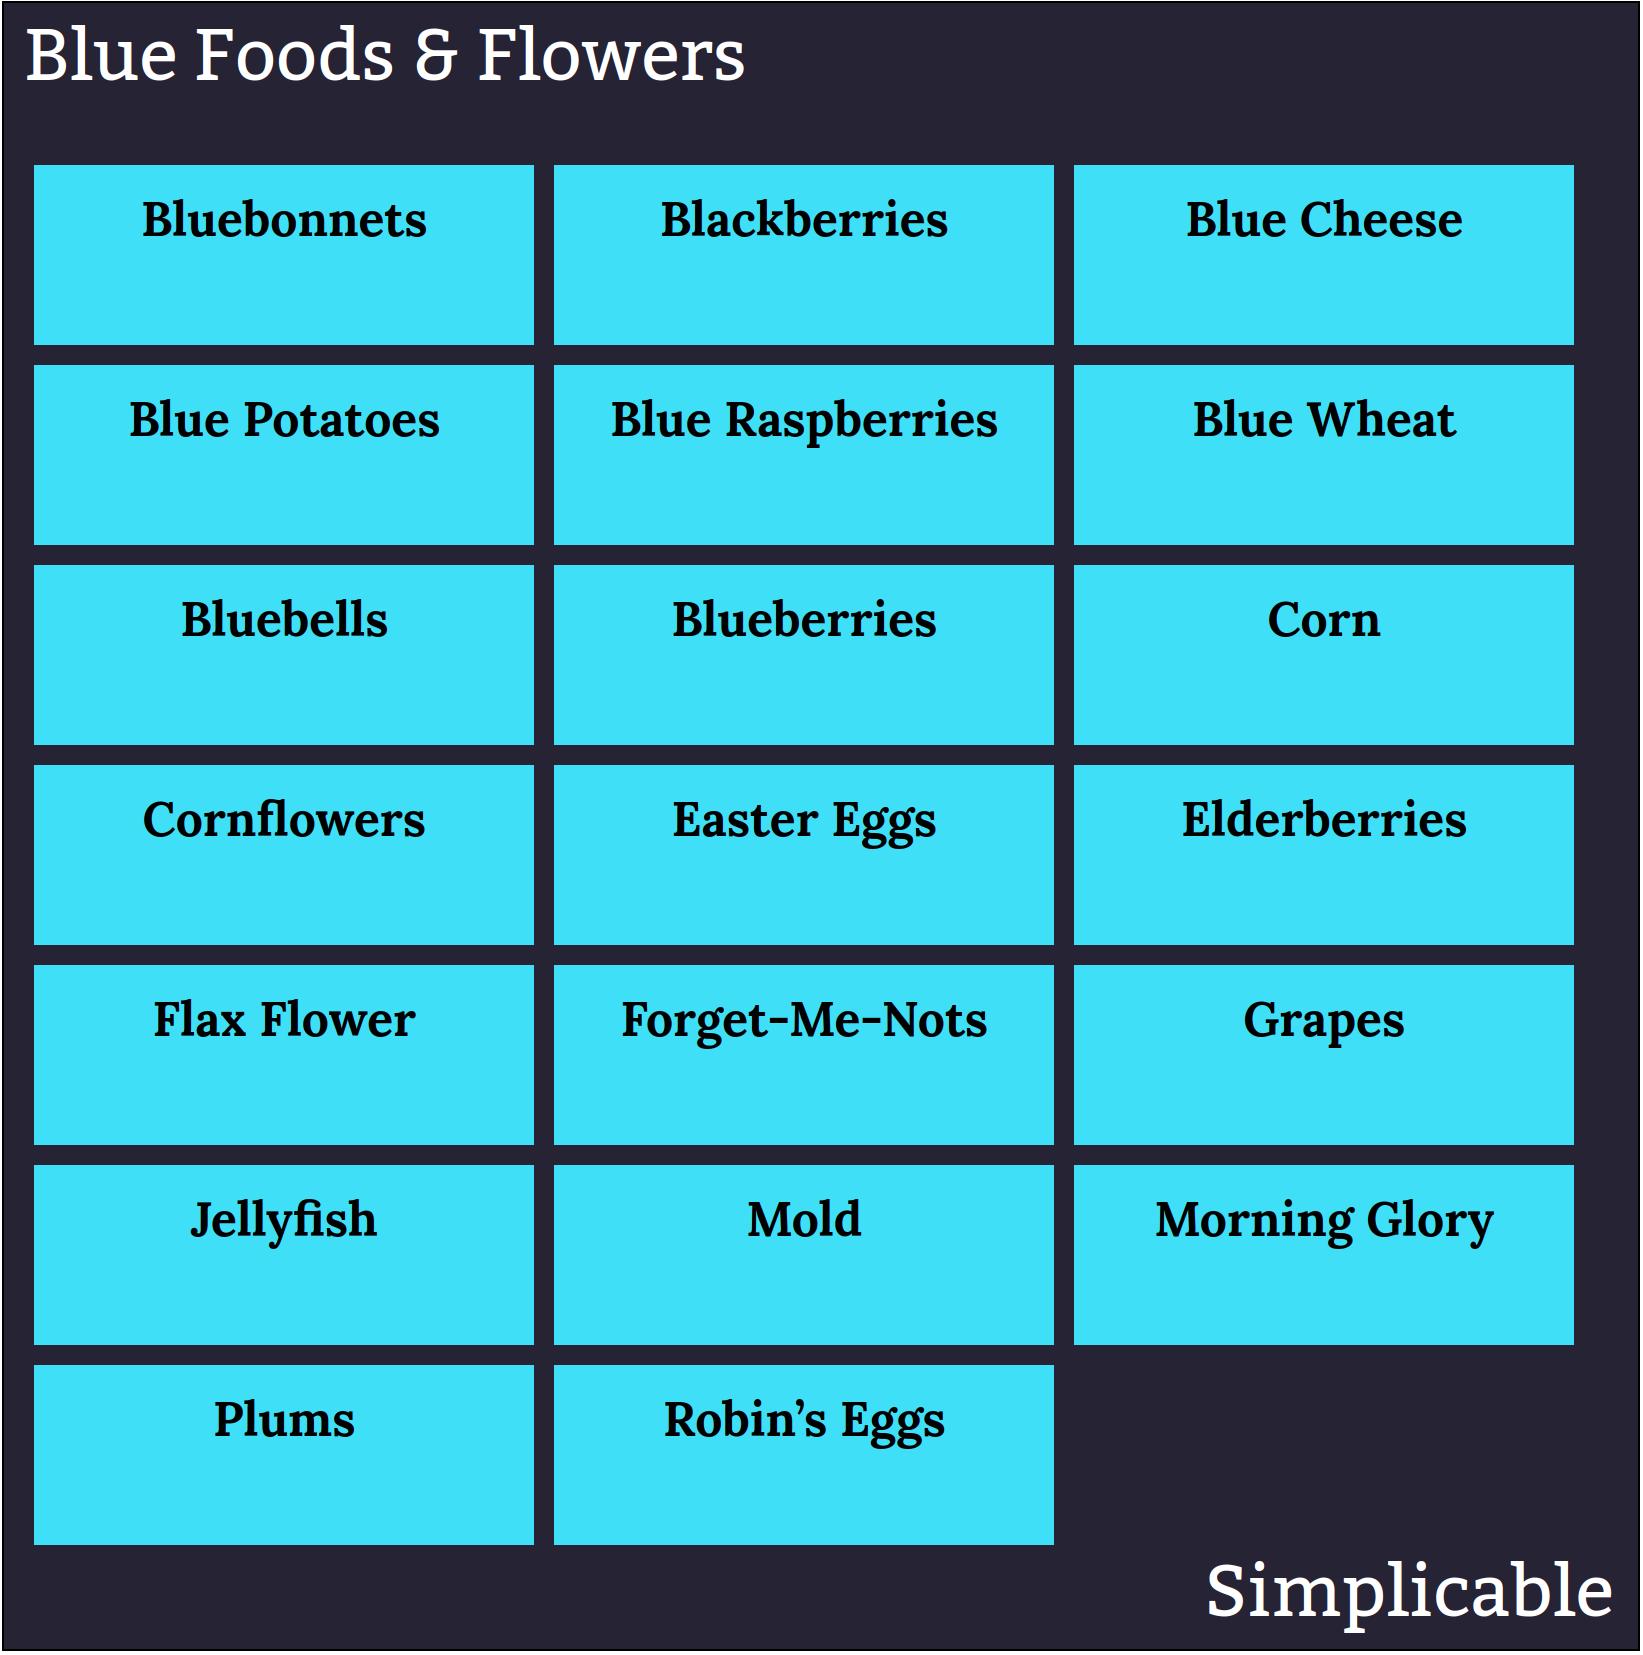 blue foods and flowers simplicable